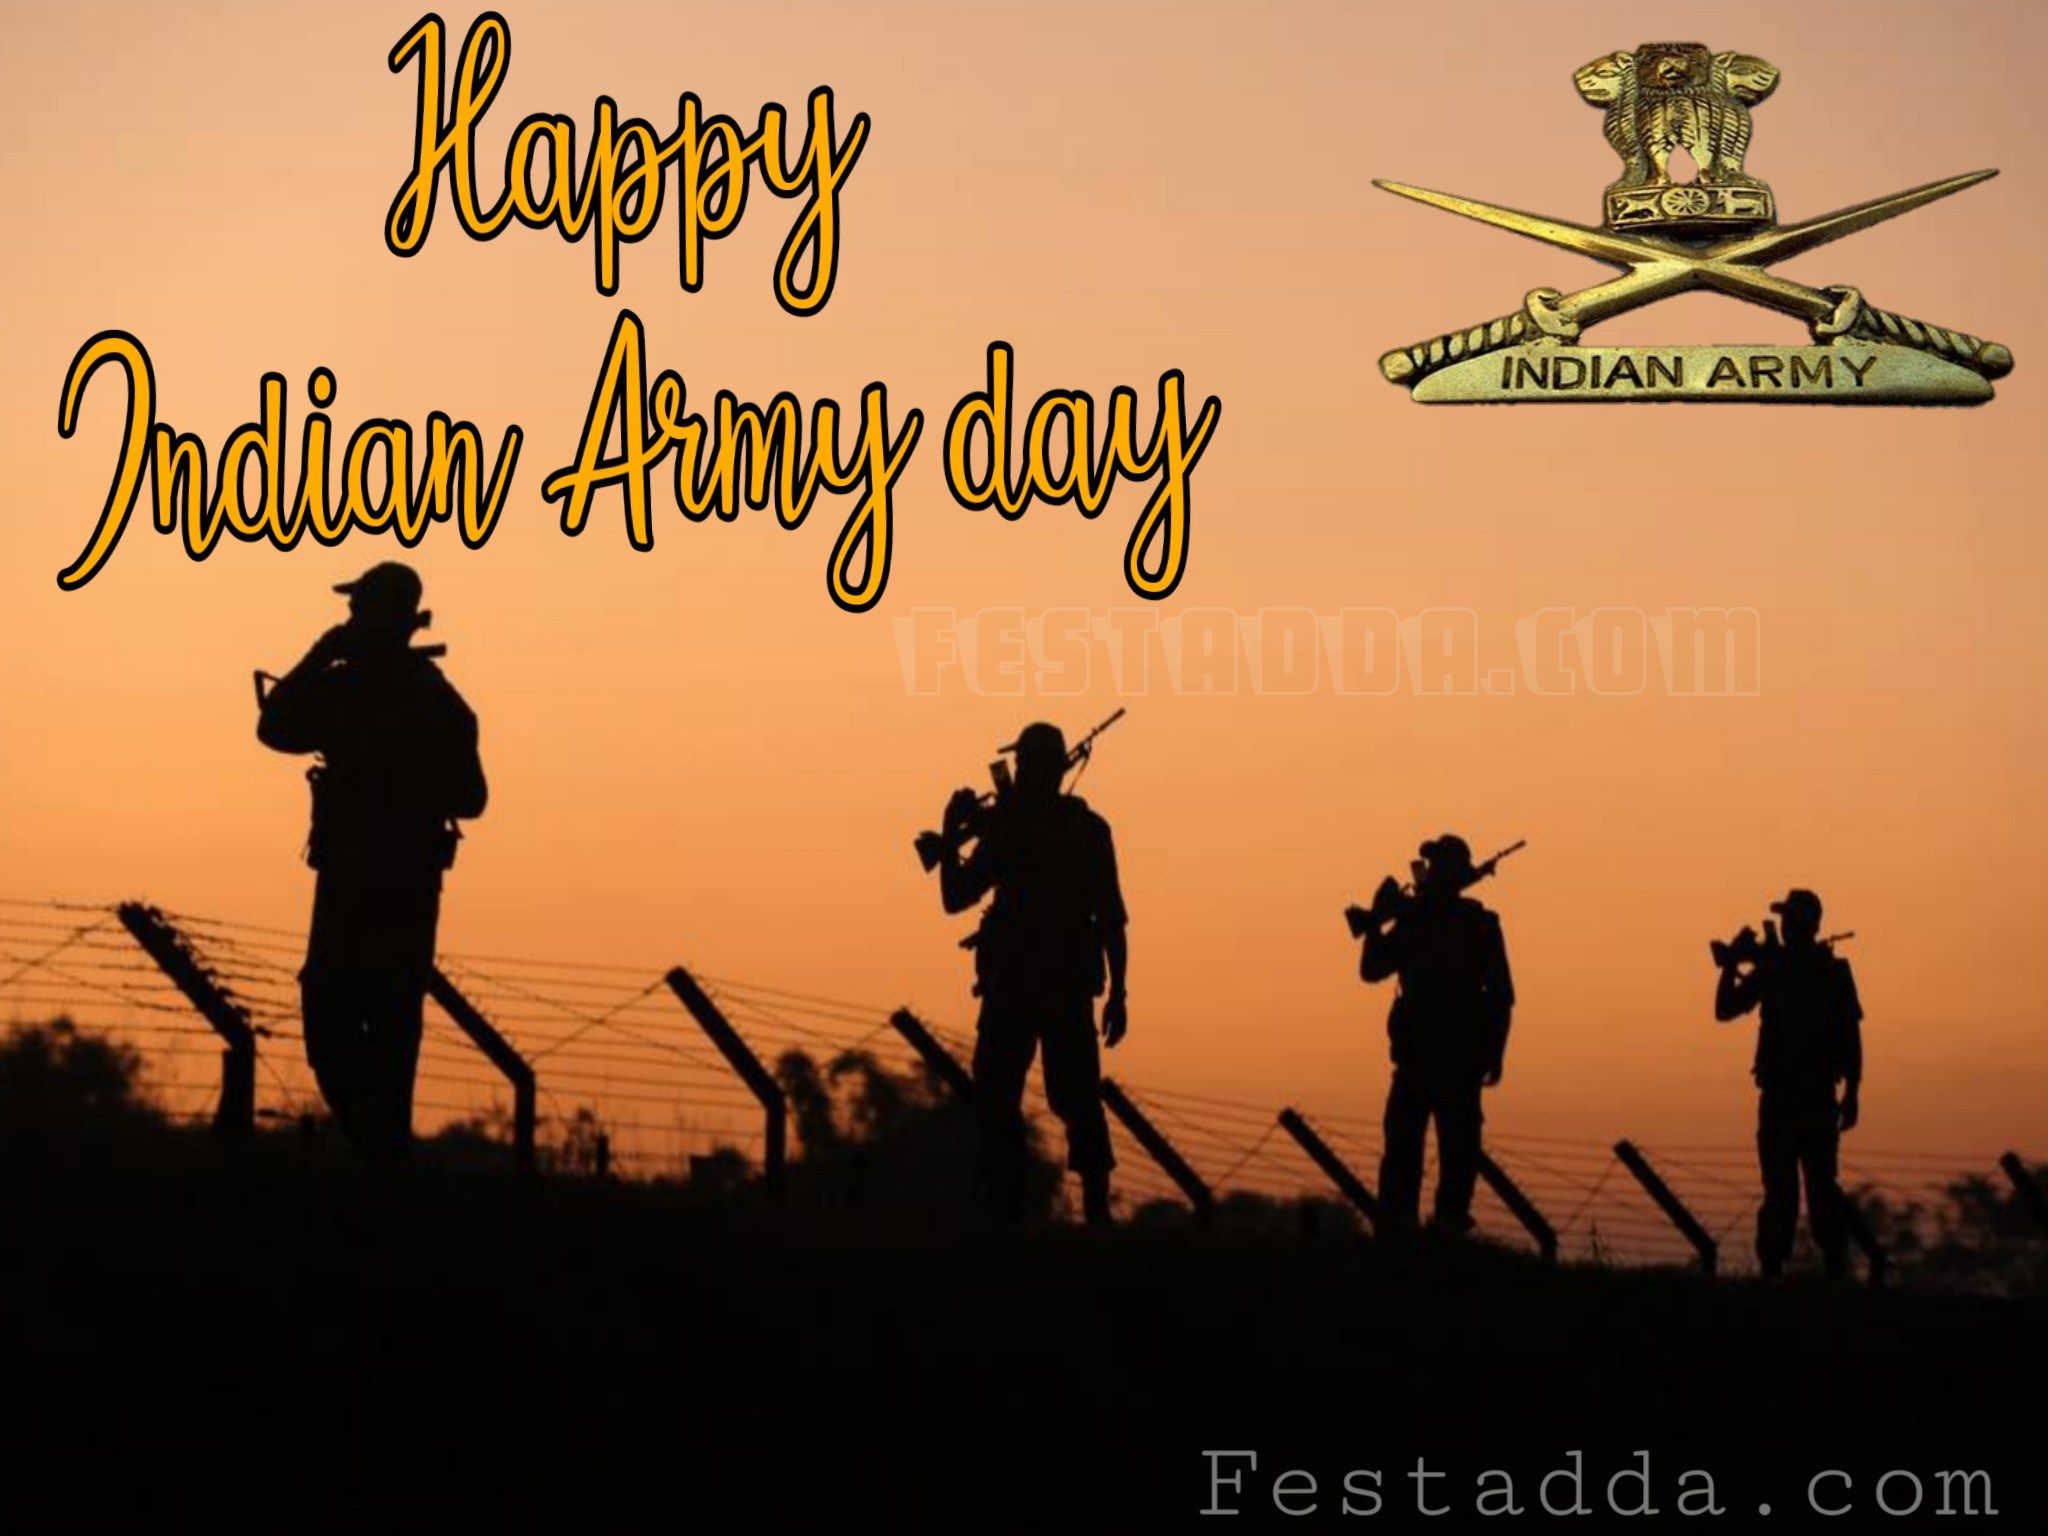 37 indian army day wallpapers on wallpapersafari 37 indian army day wallpapers on